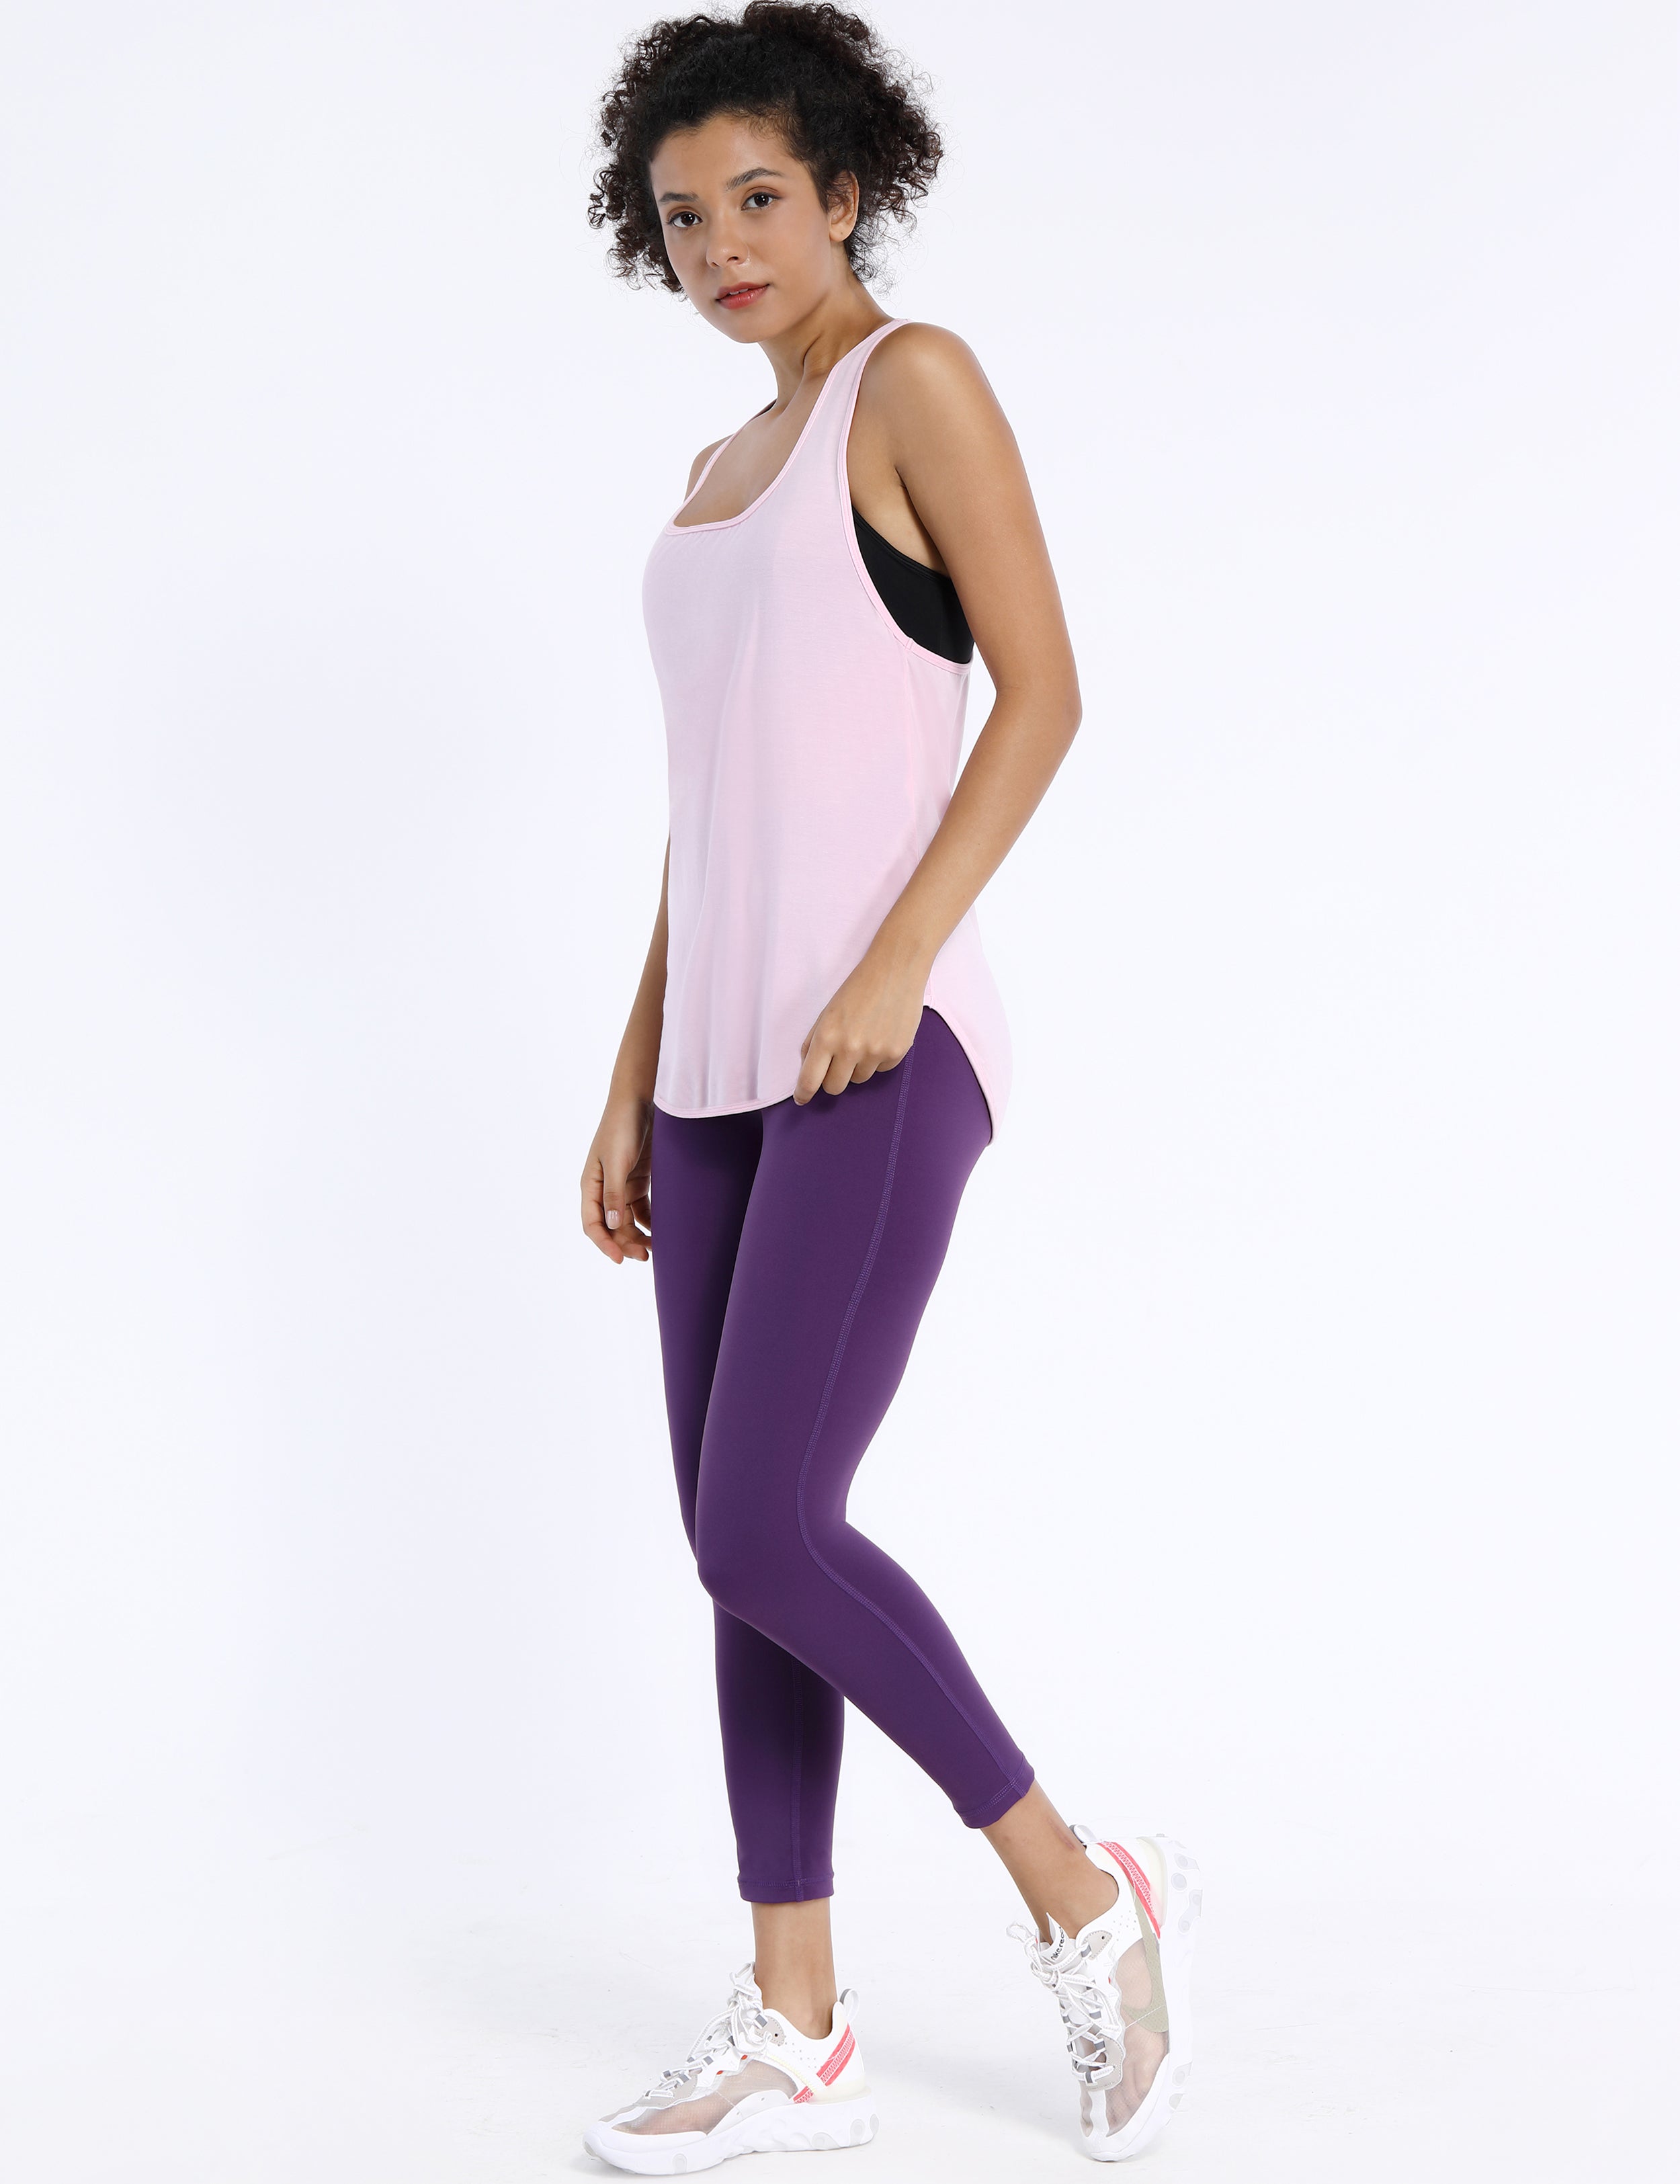 Loose Fit Racerback Tank Top lightpink Designed for On the Move Loose fit 93%Modal/7%Spandex Four-way stretch Naturally breathable Super-Soft, Modal Fabric